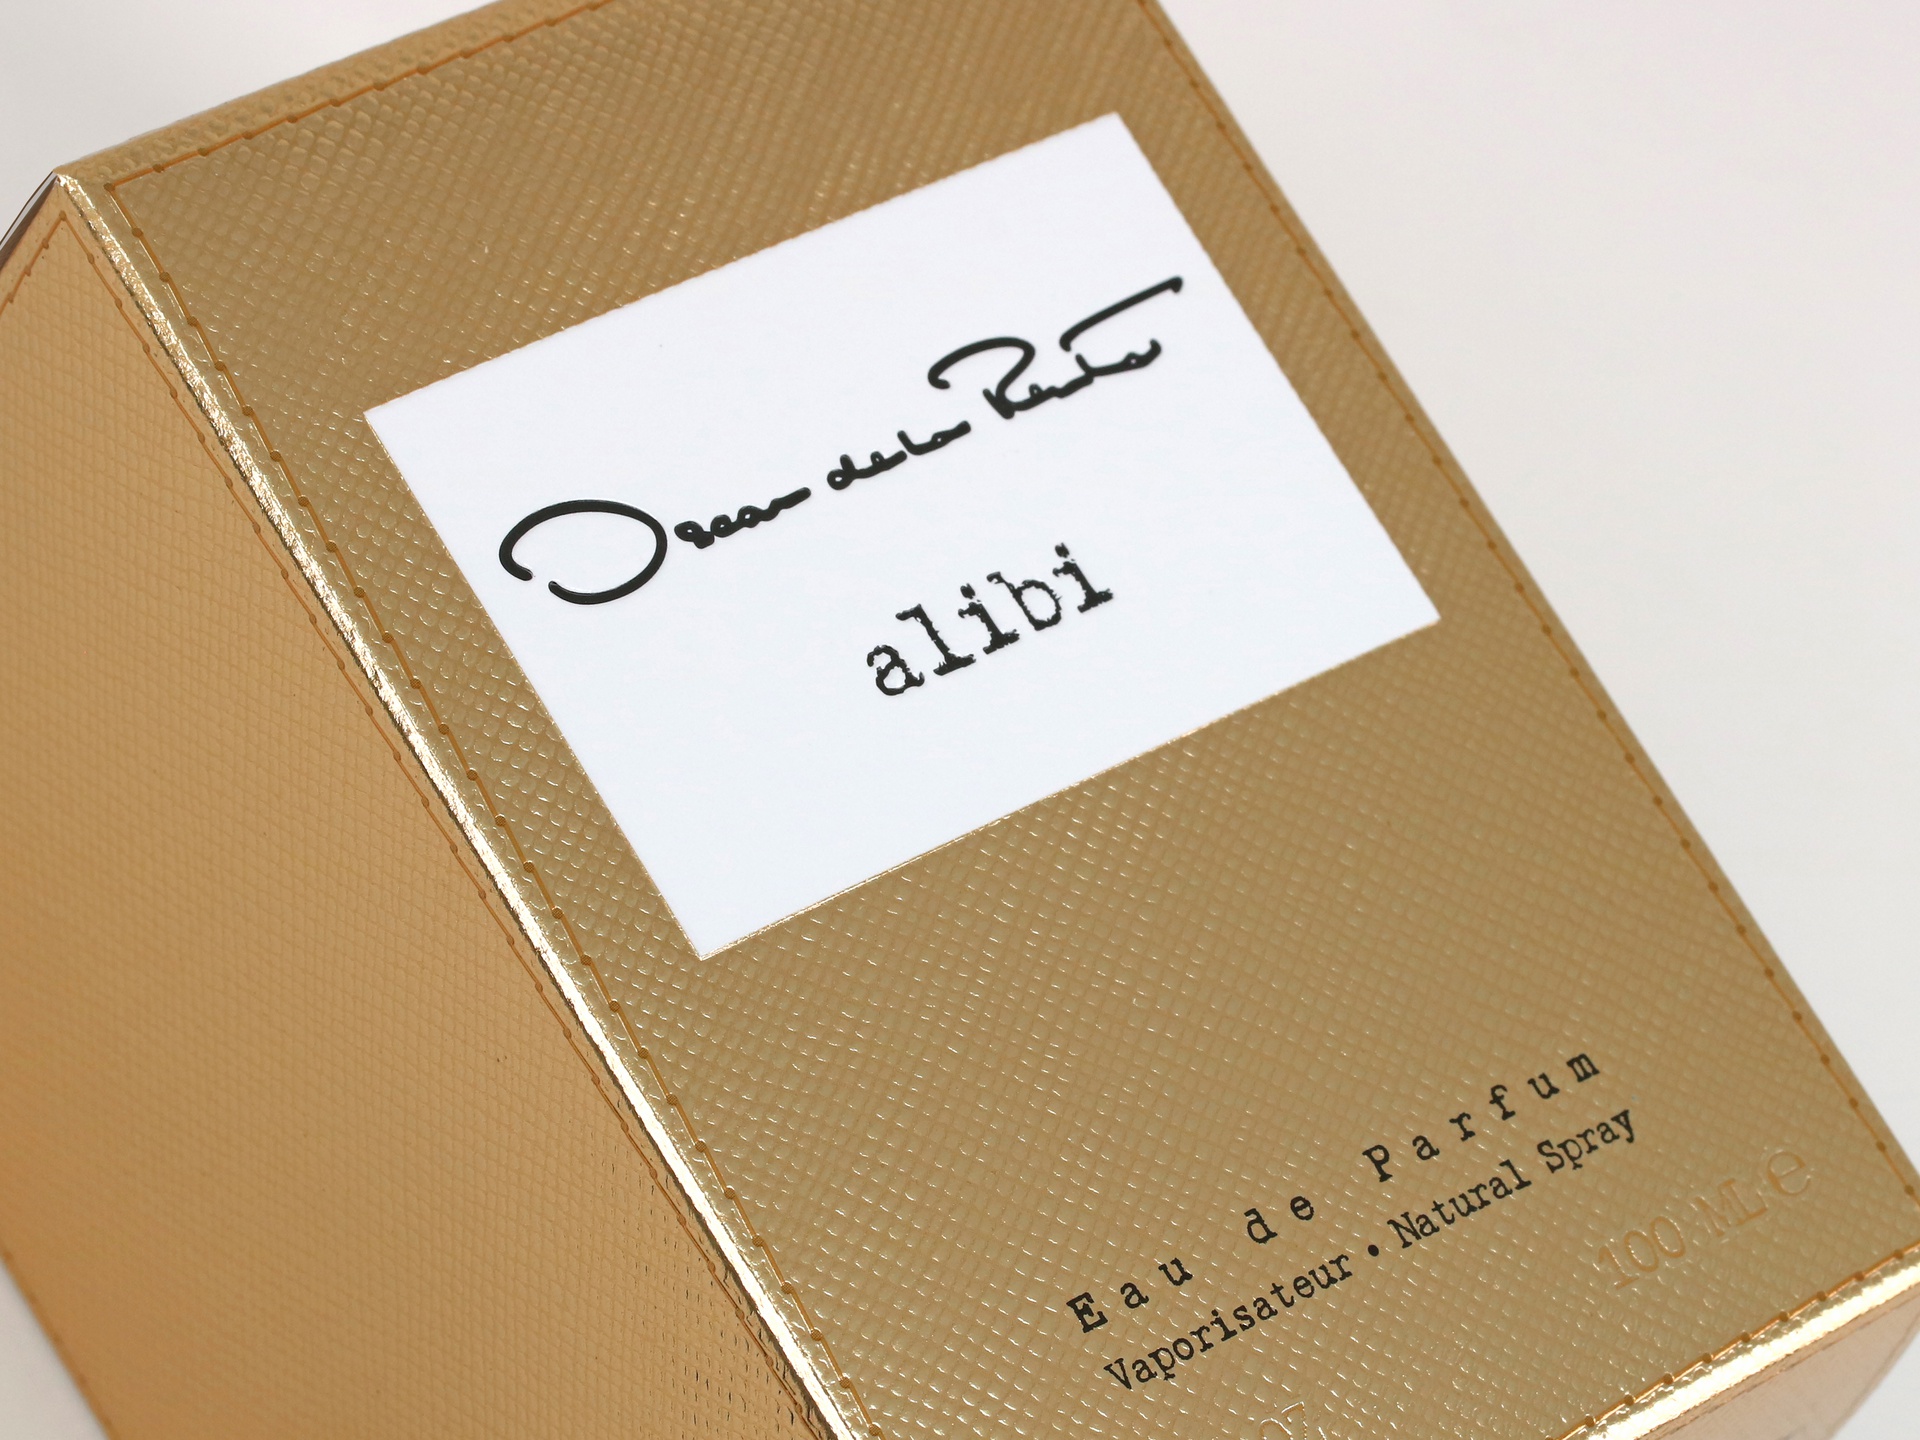 Oscar de la Renta Alibi folding cartons feature cold foil and an overall embossed leather and stitching pattern.